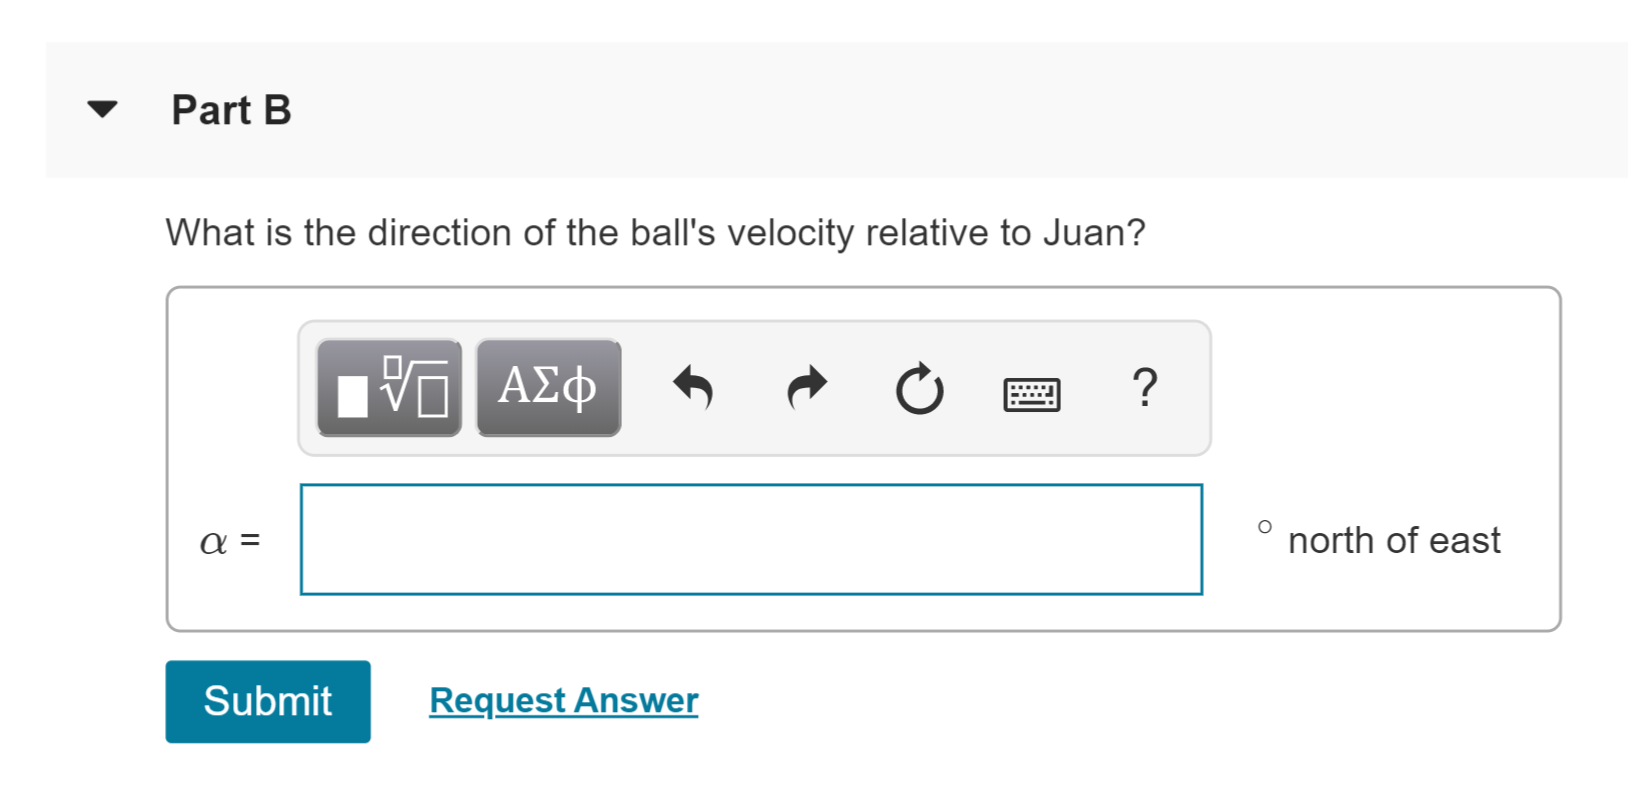 Part B
What is the direction of the ball's velocity relative to Juan?
AXC
ΑΣφ
?
north of east
α
Submit
Request Answer
